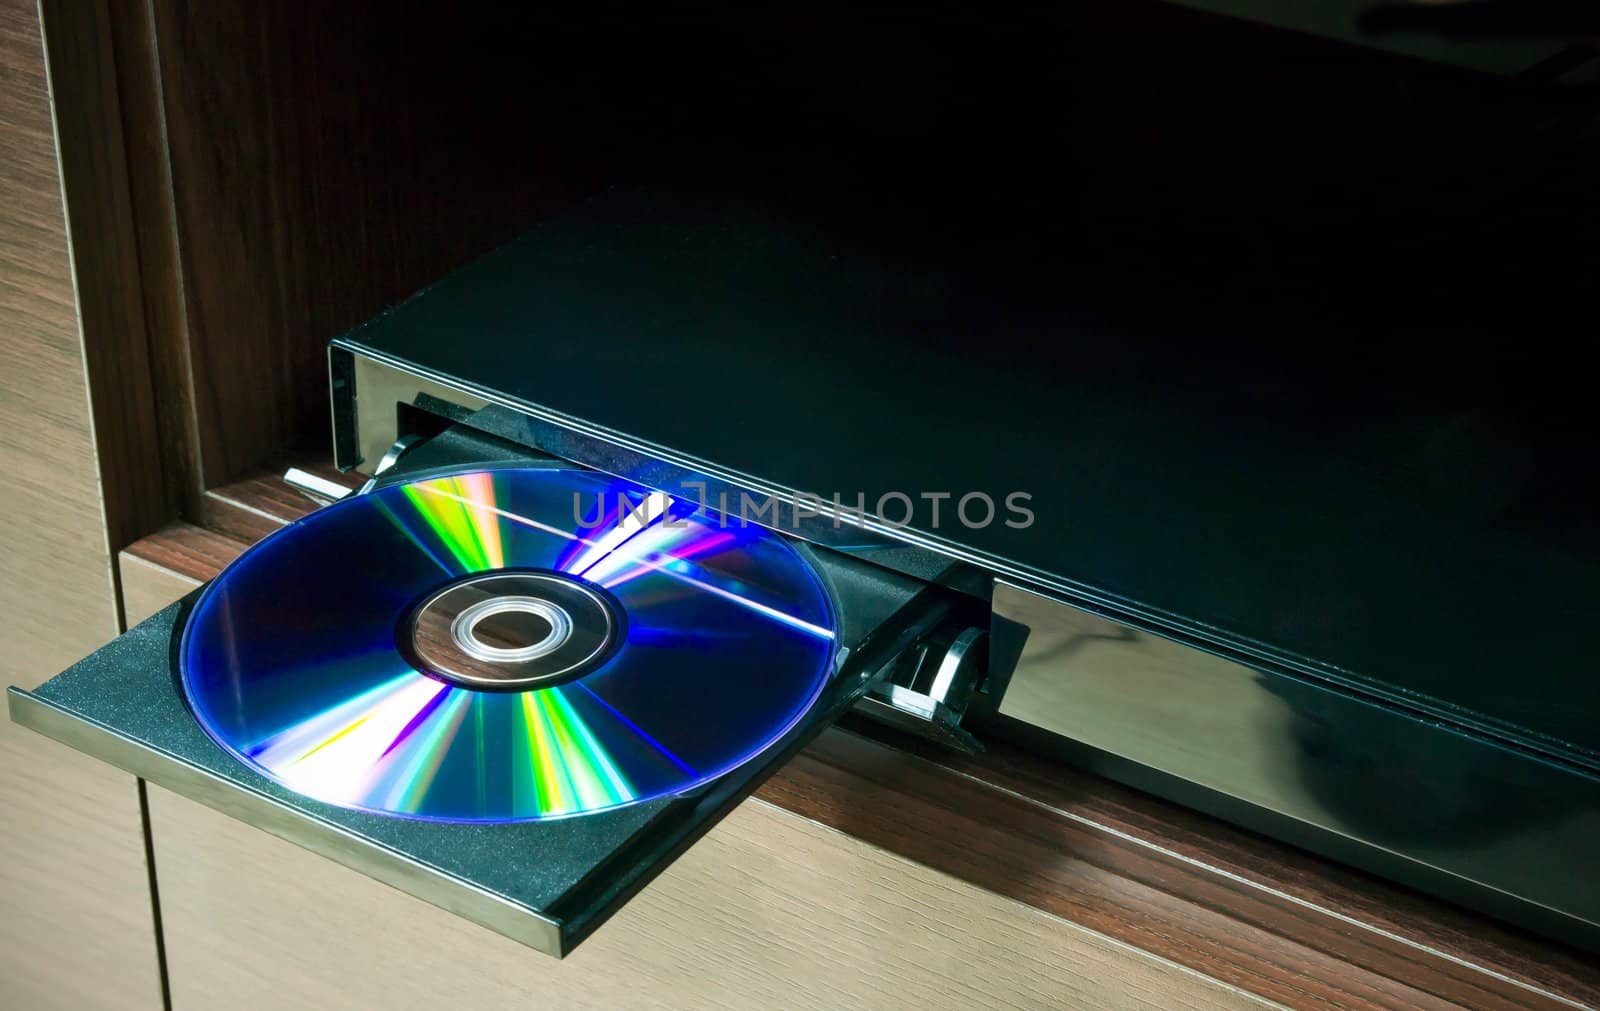 Blu-ray player with inserted disc by simpson33